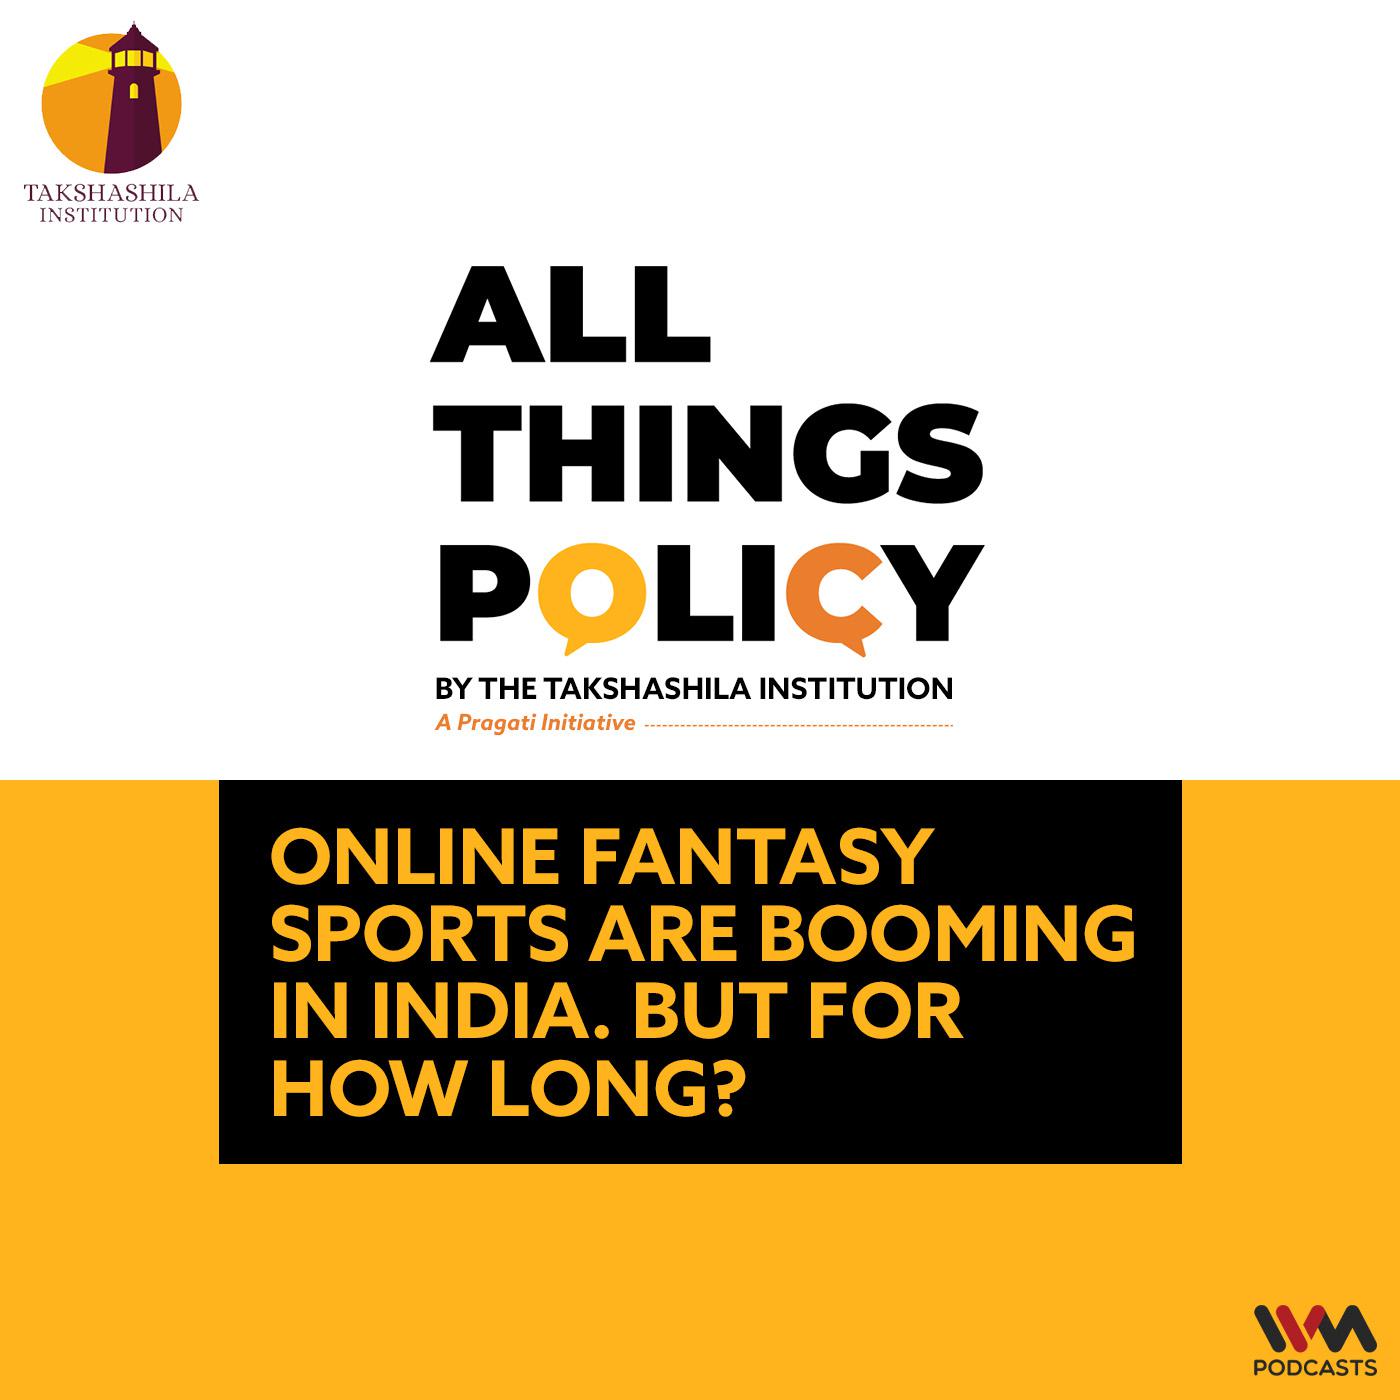 Online Fantasy Sports are booming in India. But for how long?